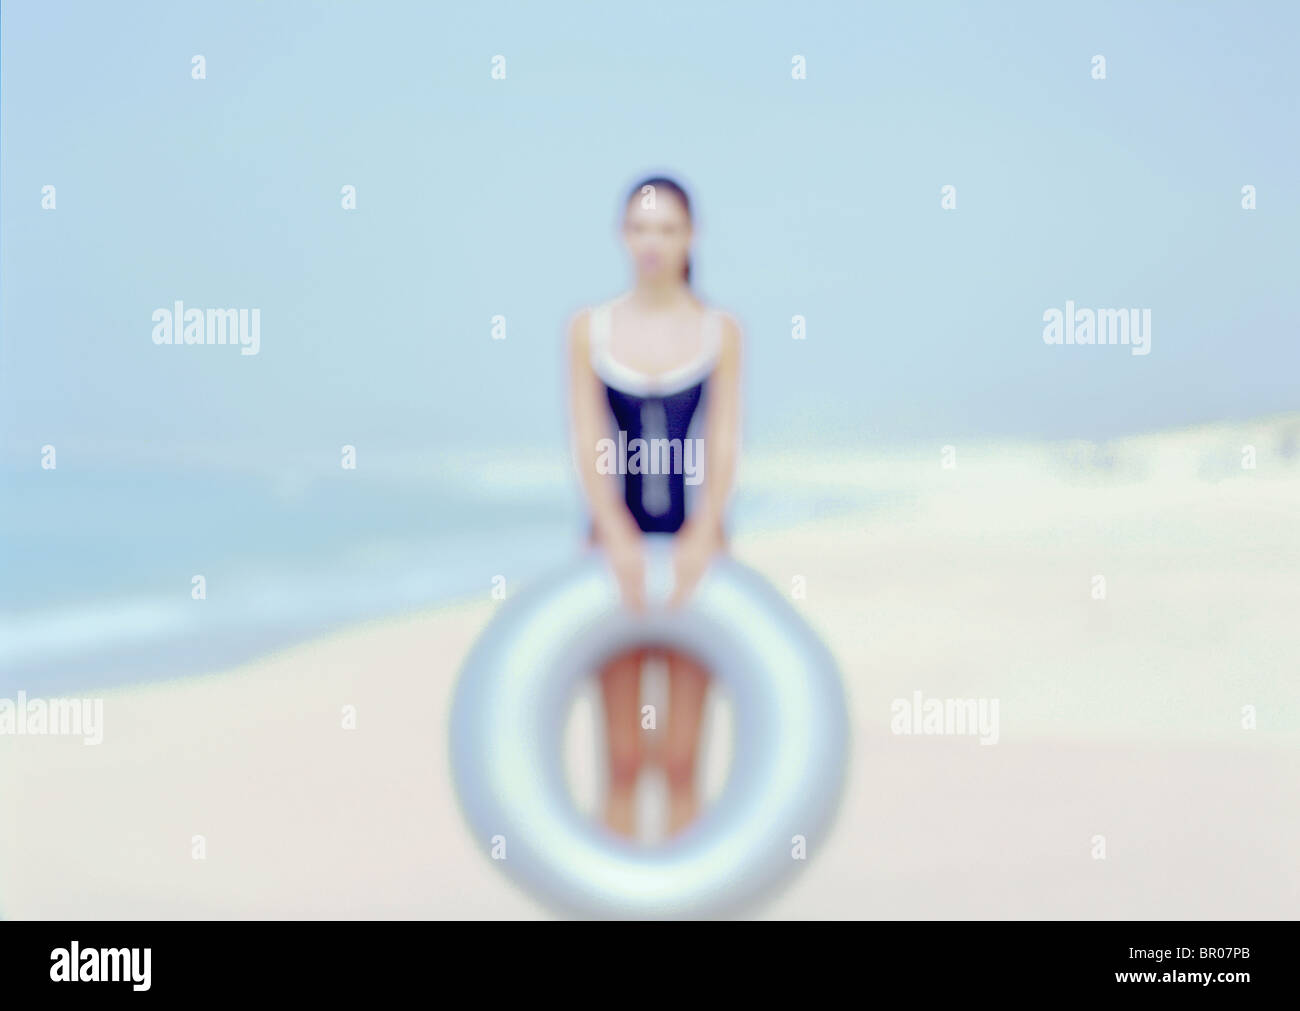 Out of focus causasian woman on a beach wearing a blue swimming suit and holding a light blue intertube. Stock Photo